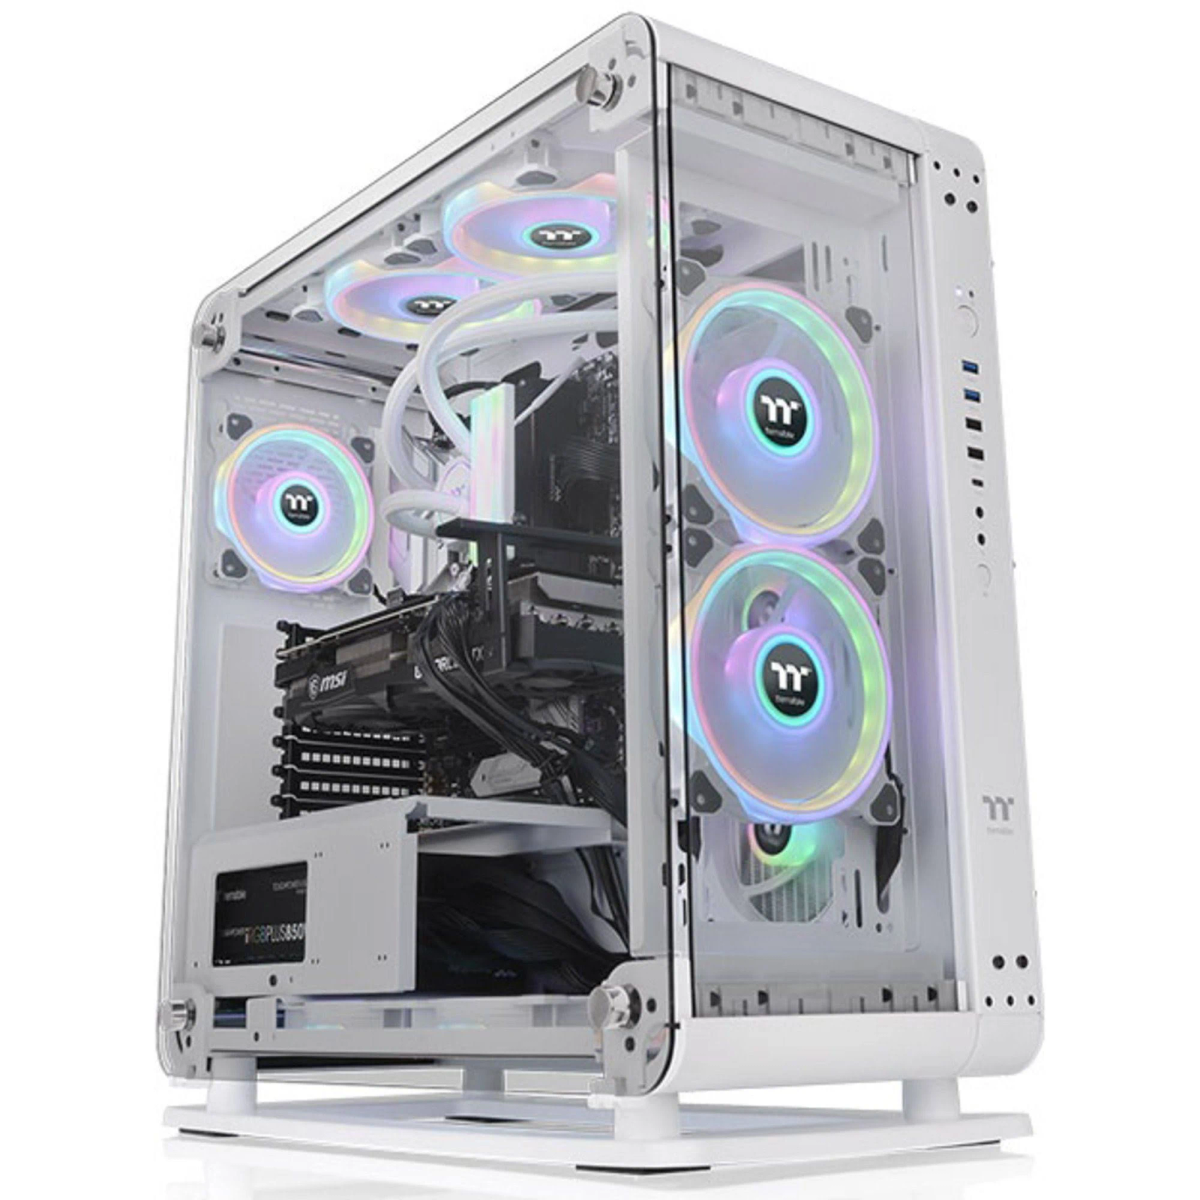 Mid P6 Core Glass THERMALTAKE Tempered Gehäuse, Tower PC Snow weiss